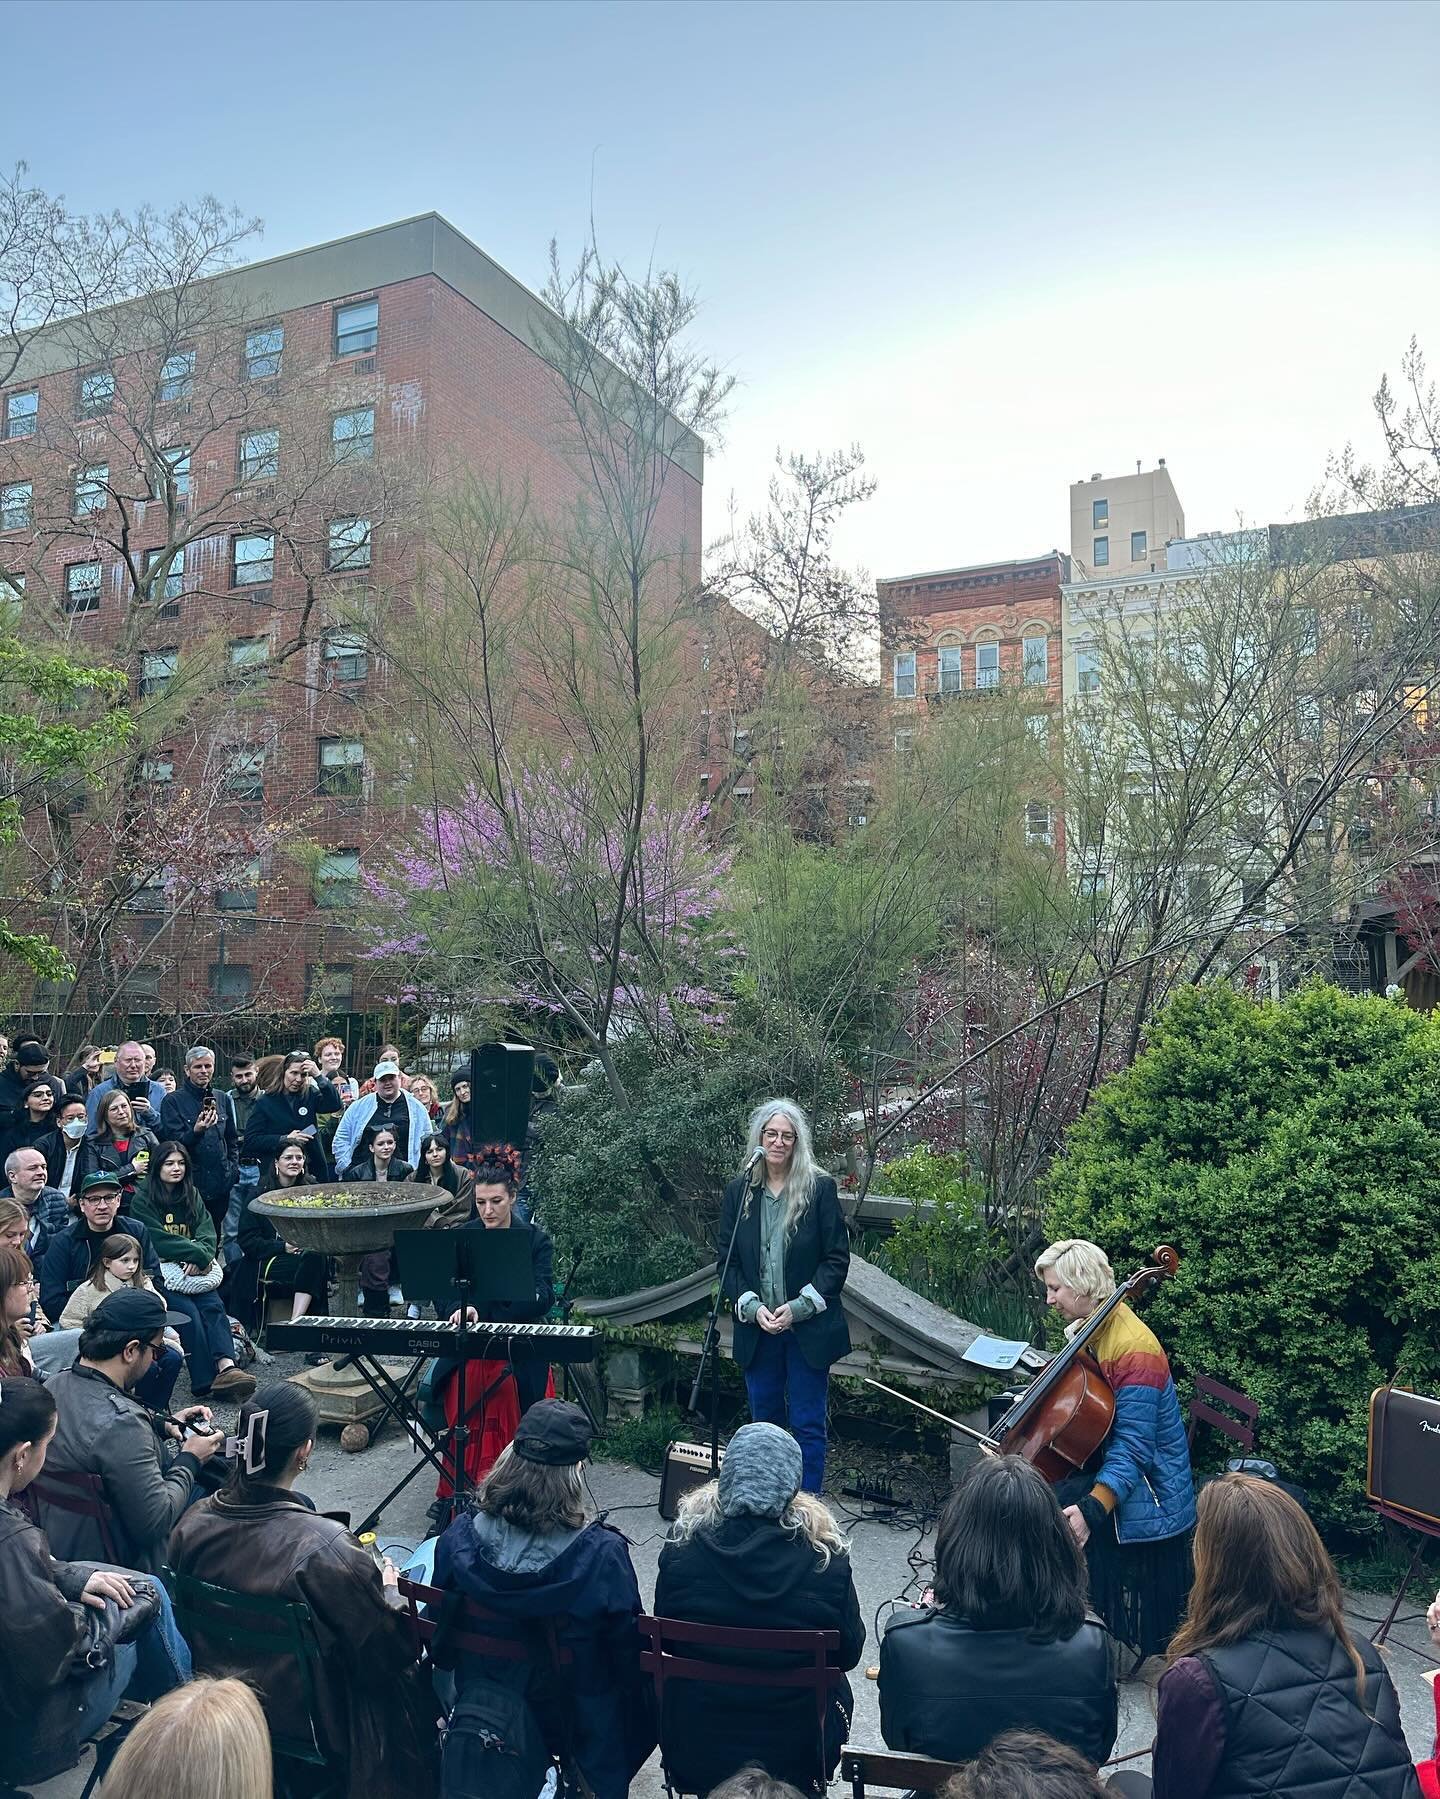 Thanks to all who joined us in the garden to celebrate nature and our Mother Earth. 

Our sincere gratitude to @michiganmanhattan @thisispattismith @pathway2paris @foonbeck @landaudeborah @yogi.ney @eloisaam @josephreiver for sharing your beautiful w